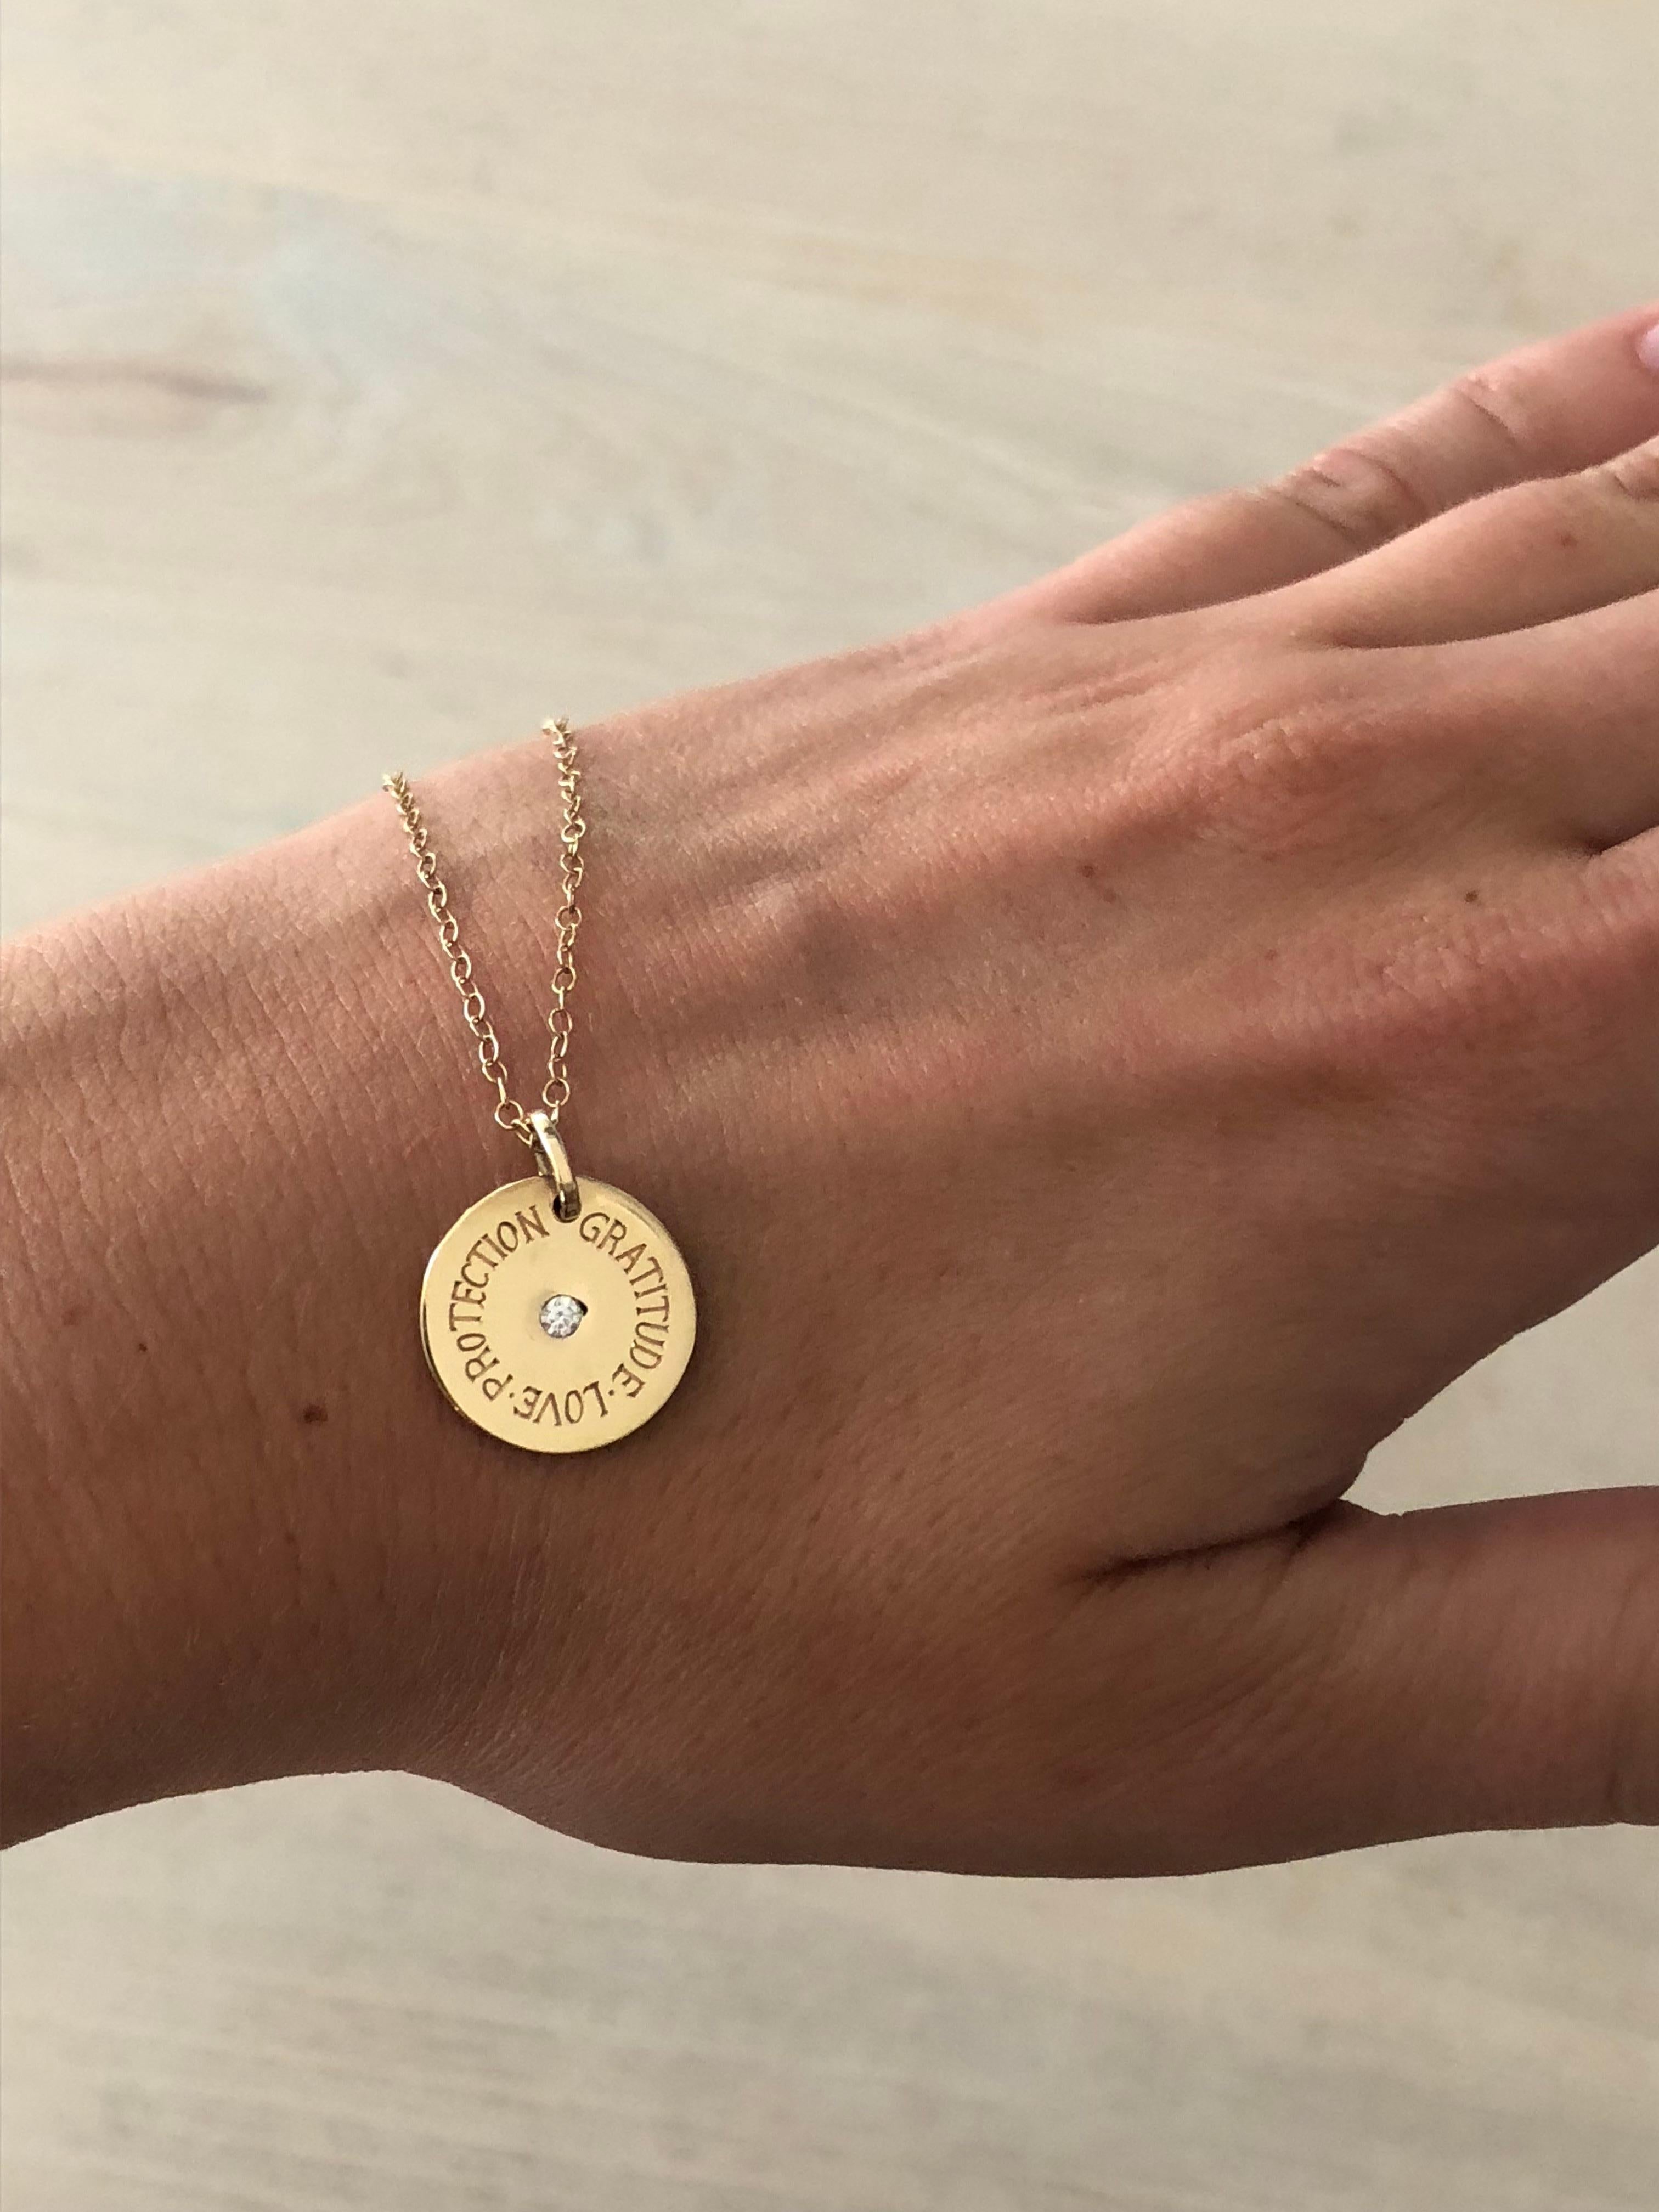 This 9 karat gold charm has powerful words hand engraved around the disc to protect its wearer. Gratitude, Love, Protection. To remind us to be grateful for all we have, to invite love and to attract protection at all times.

Options to personalize